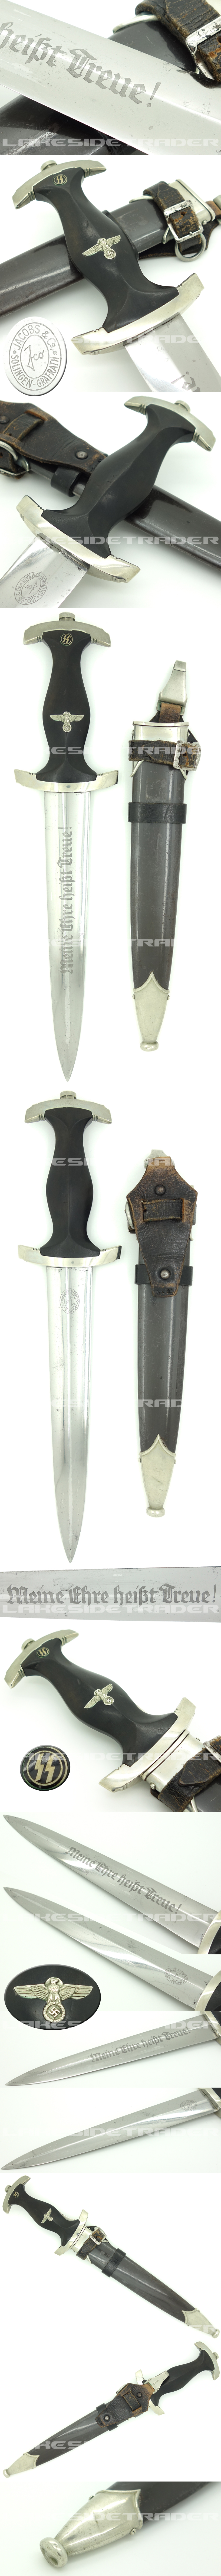 Exclamation Mark - Early SS Dagger by Jacobs & Co.